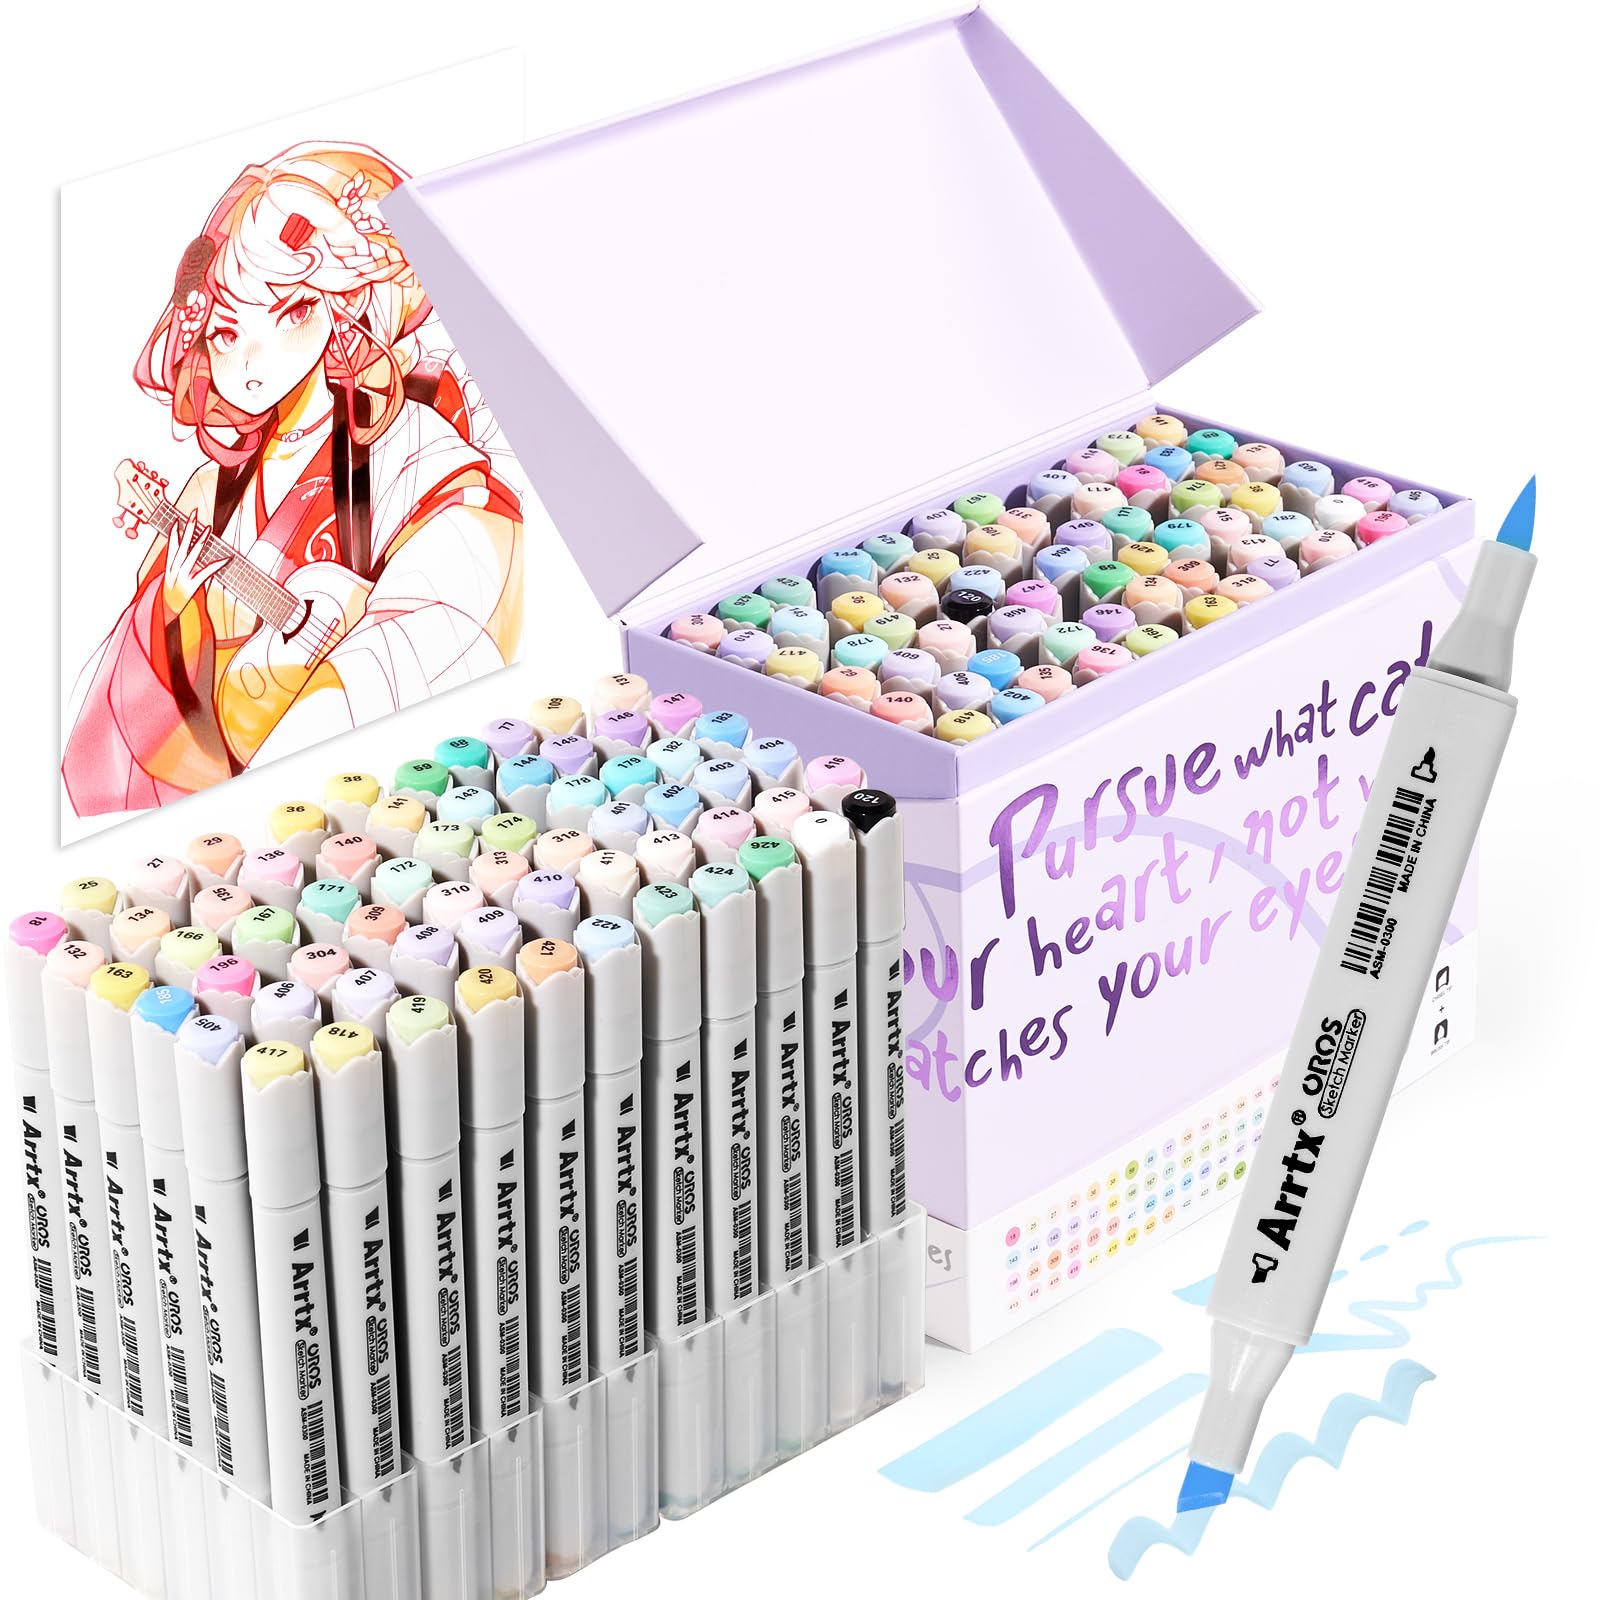 Arrtx OROS 40 Pastel Colors Brush Markers Set Alcohol-based Stable